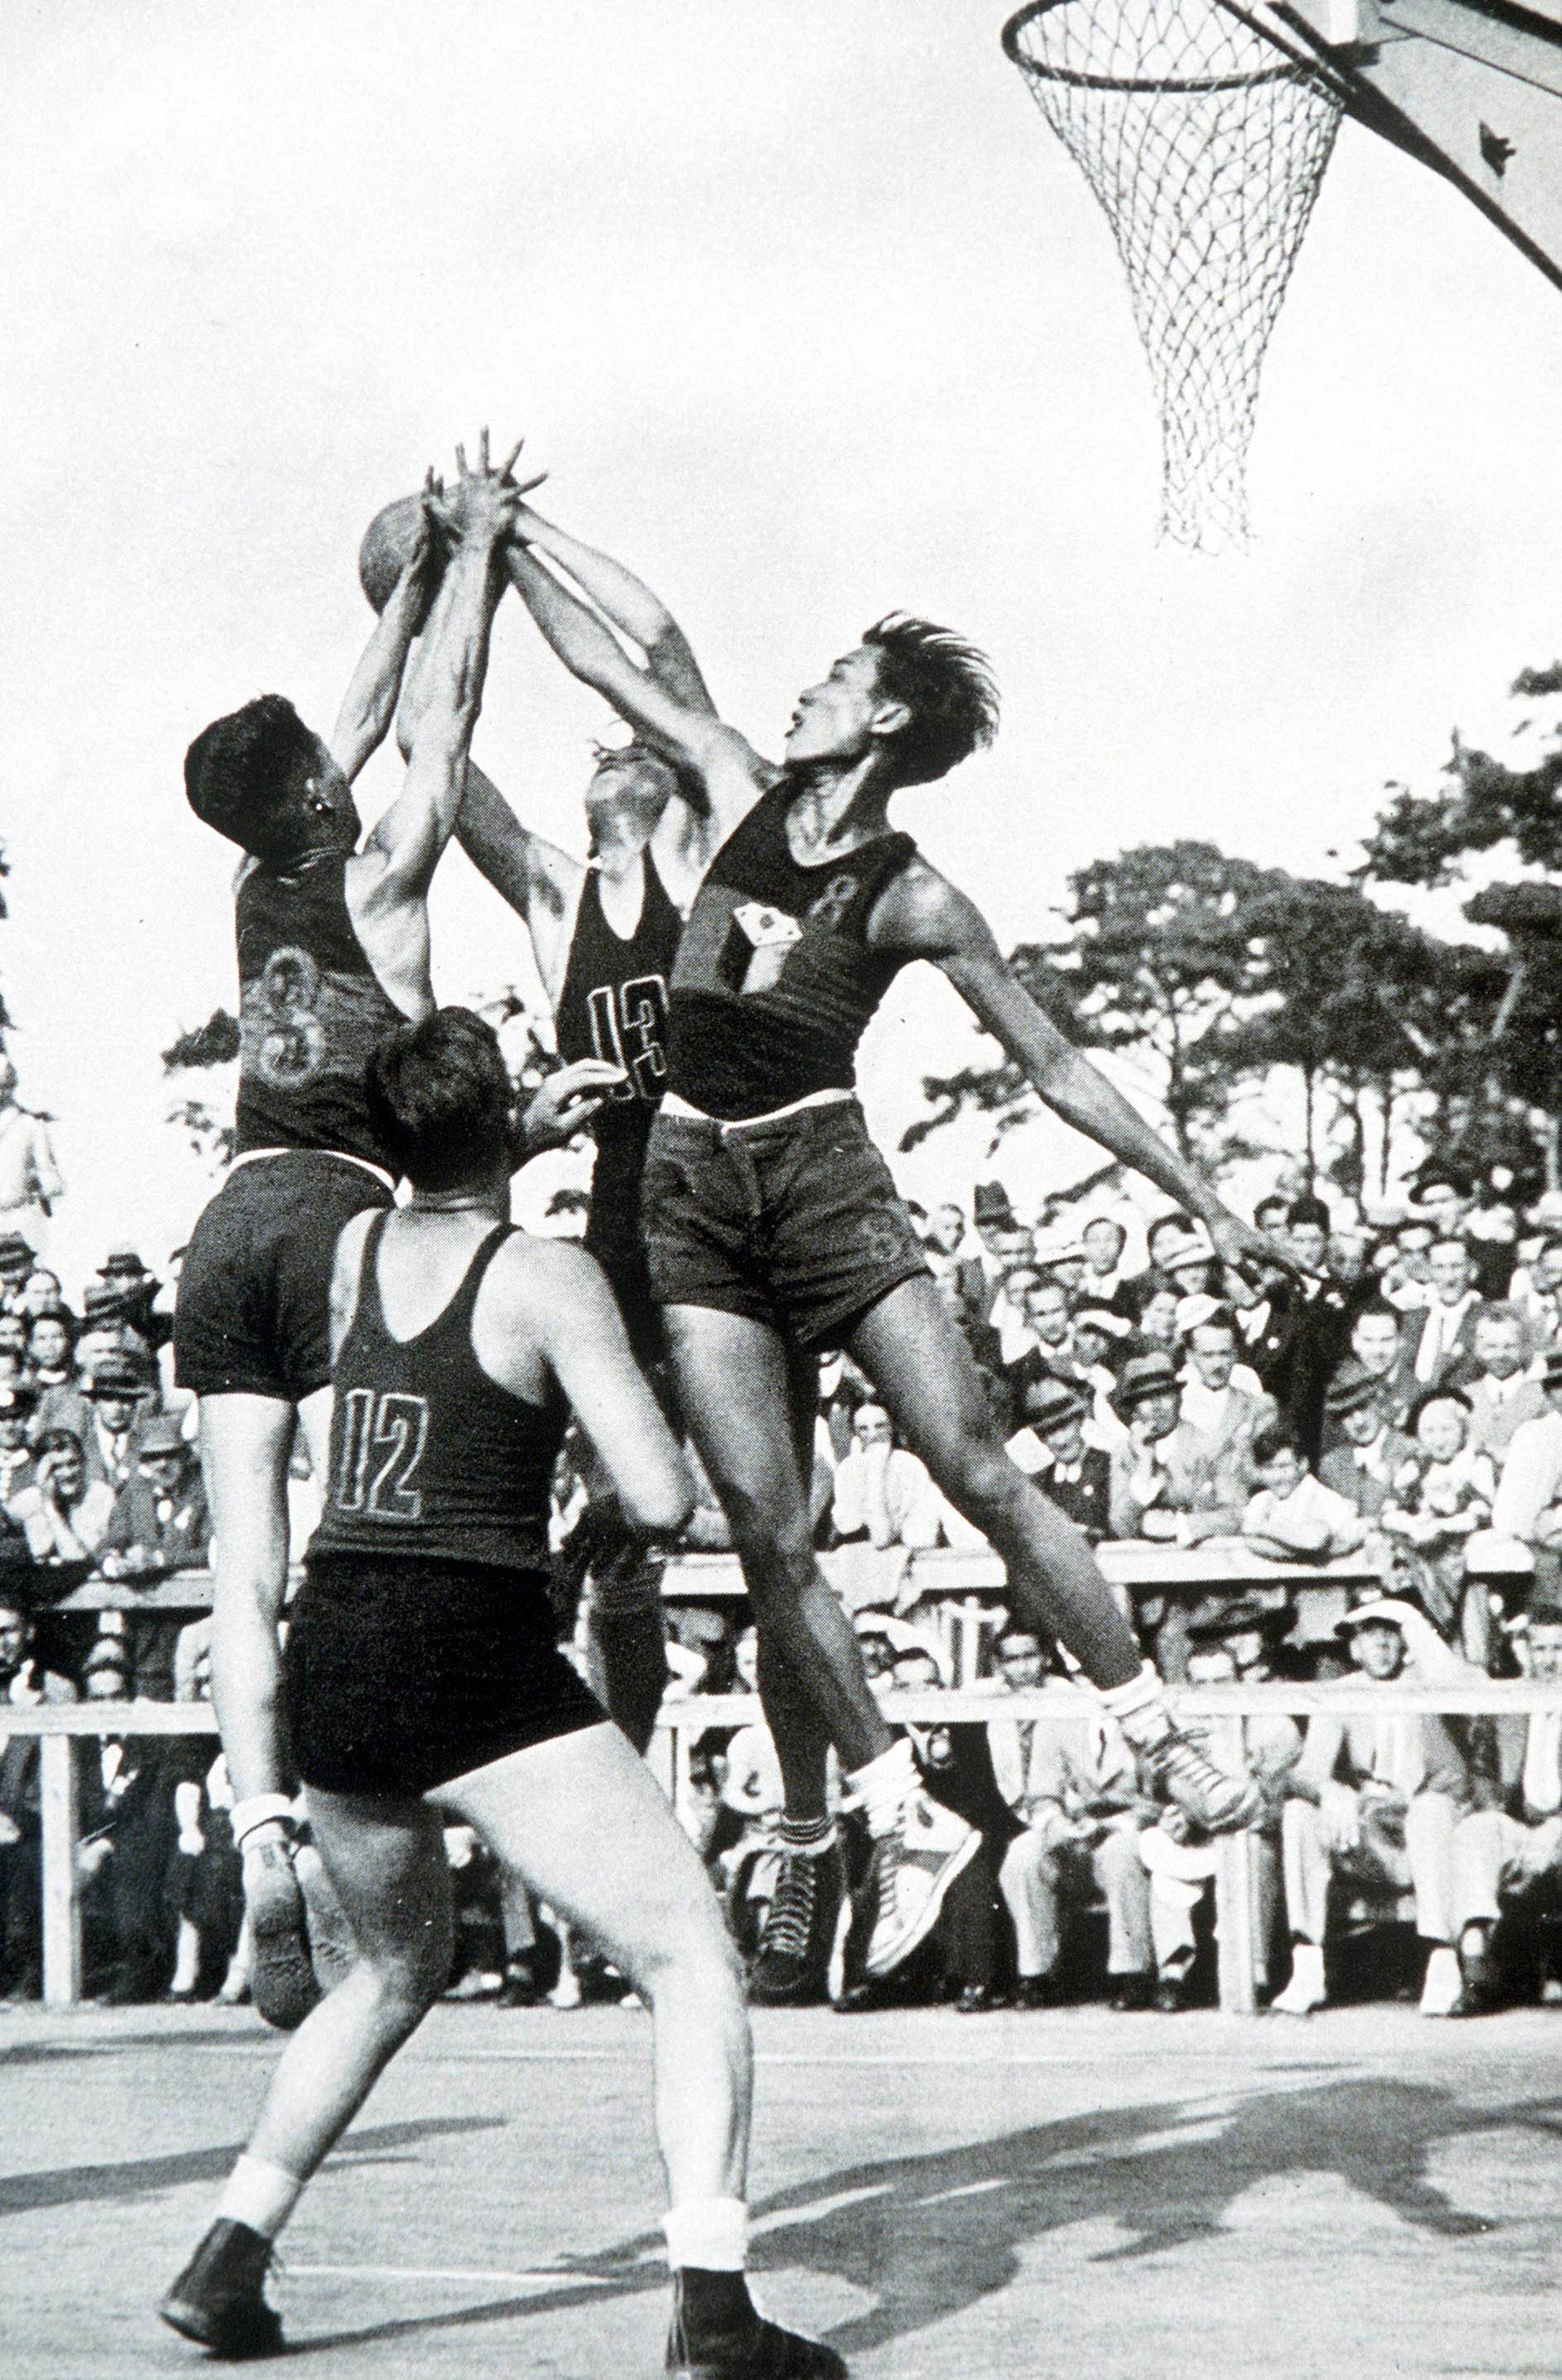 1936 Olympic Games, Berlin, Germany. Basketball action between the Philippines and Mexico.